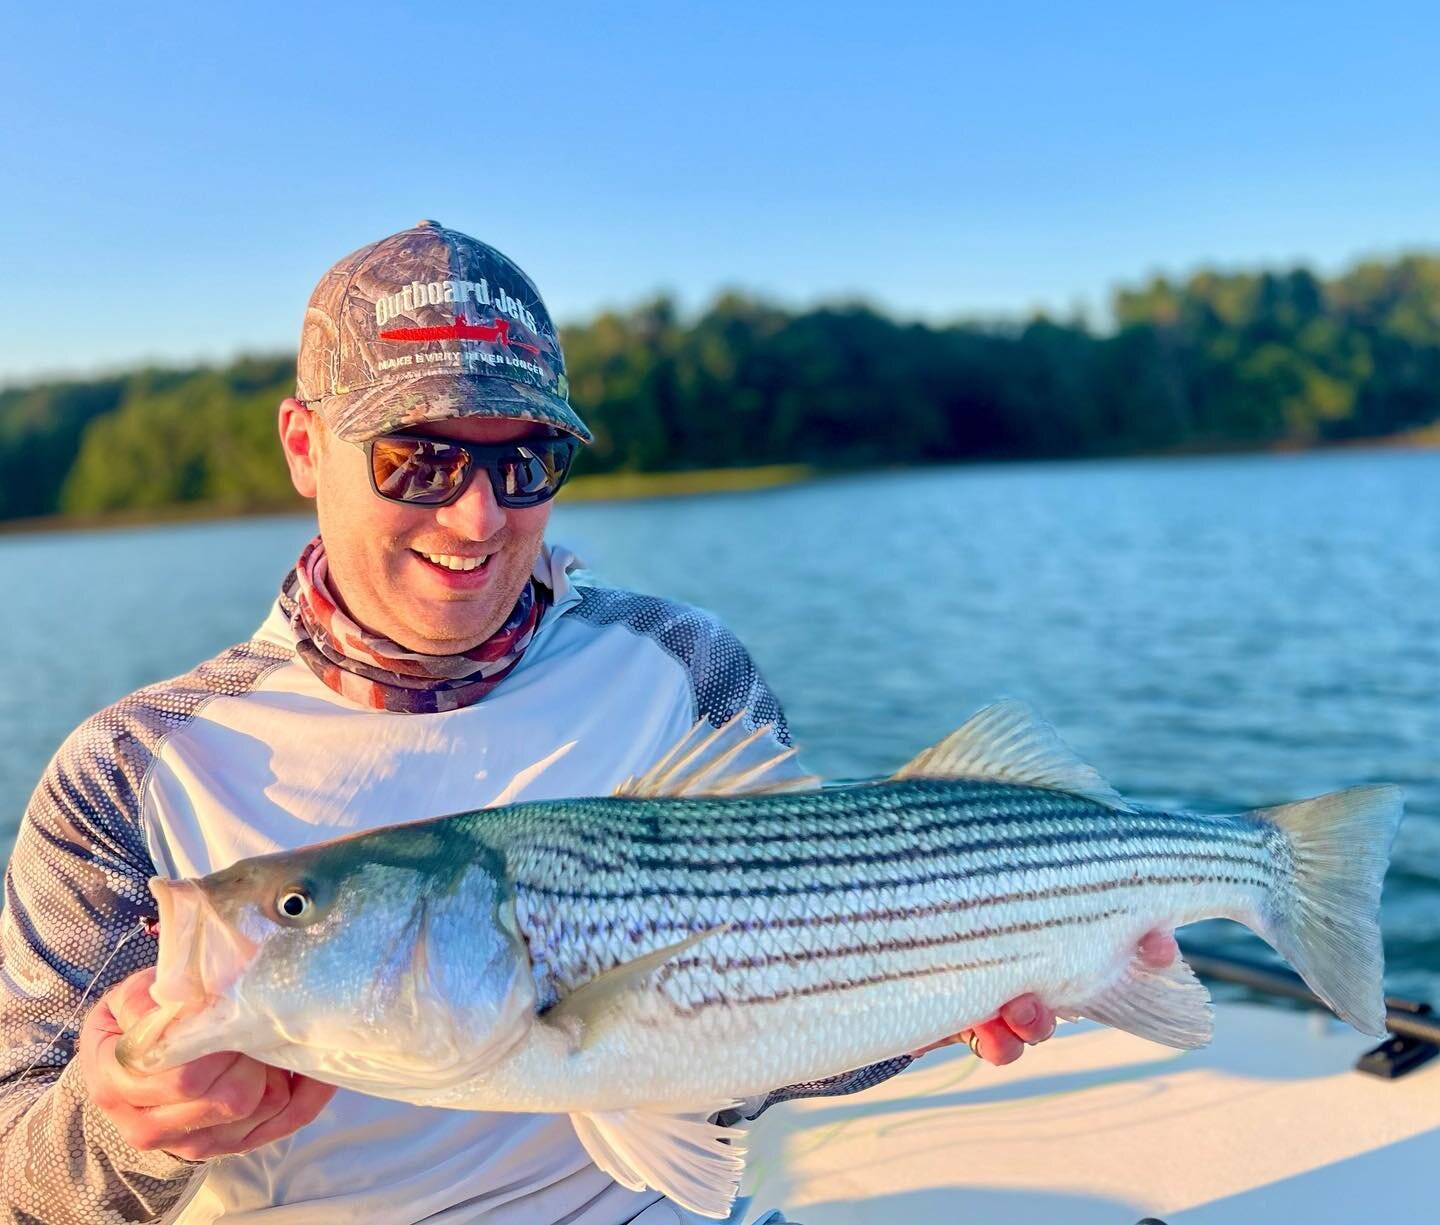 Had the pleasure of guiding @ontheriseflyfishing for his first striper, and it didn&rsquo;t take long after it got light out to accomplish that in style with an impressive shot and fight. Then it was rinse n repeat on replay! His face says it all, so